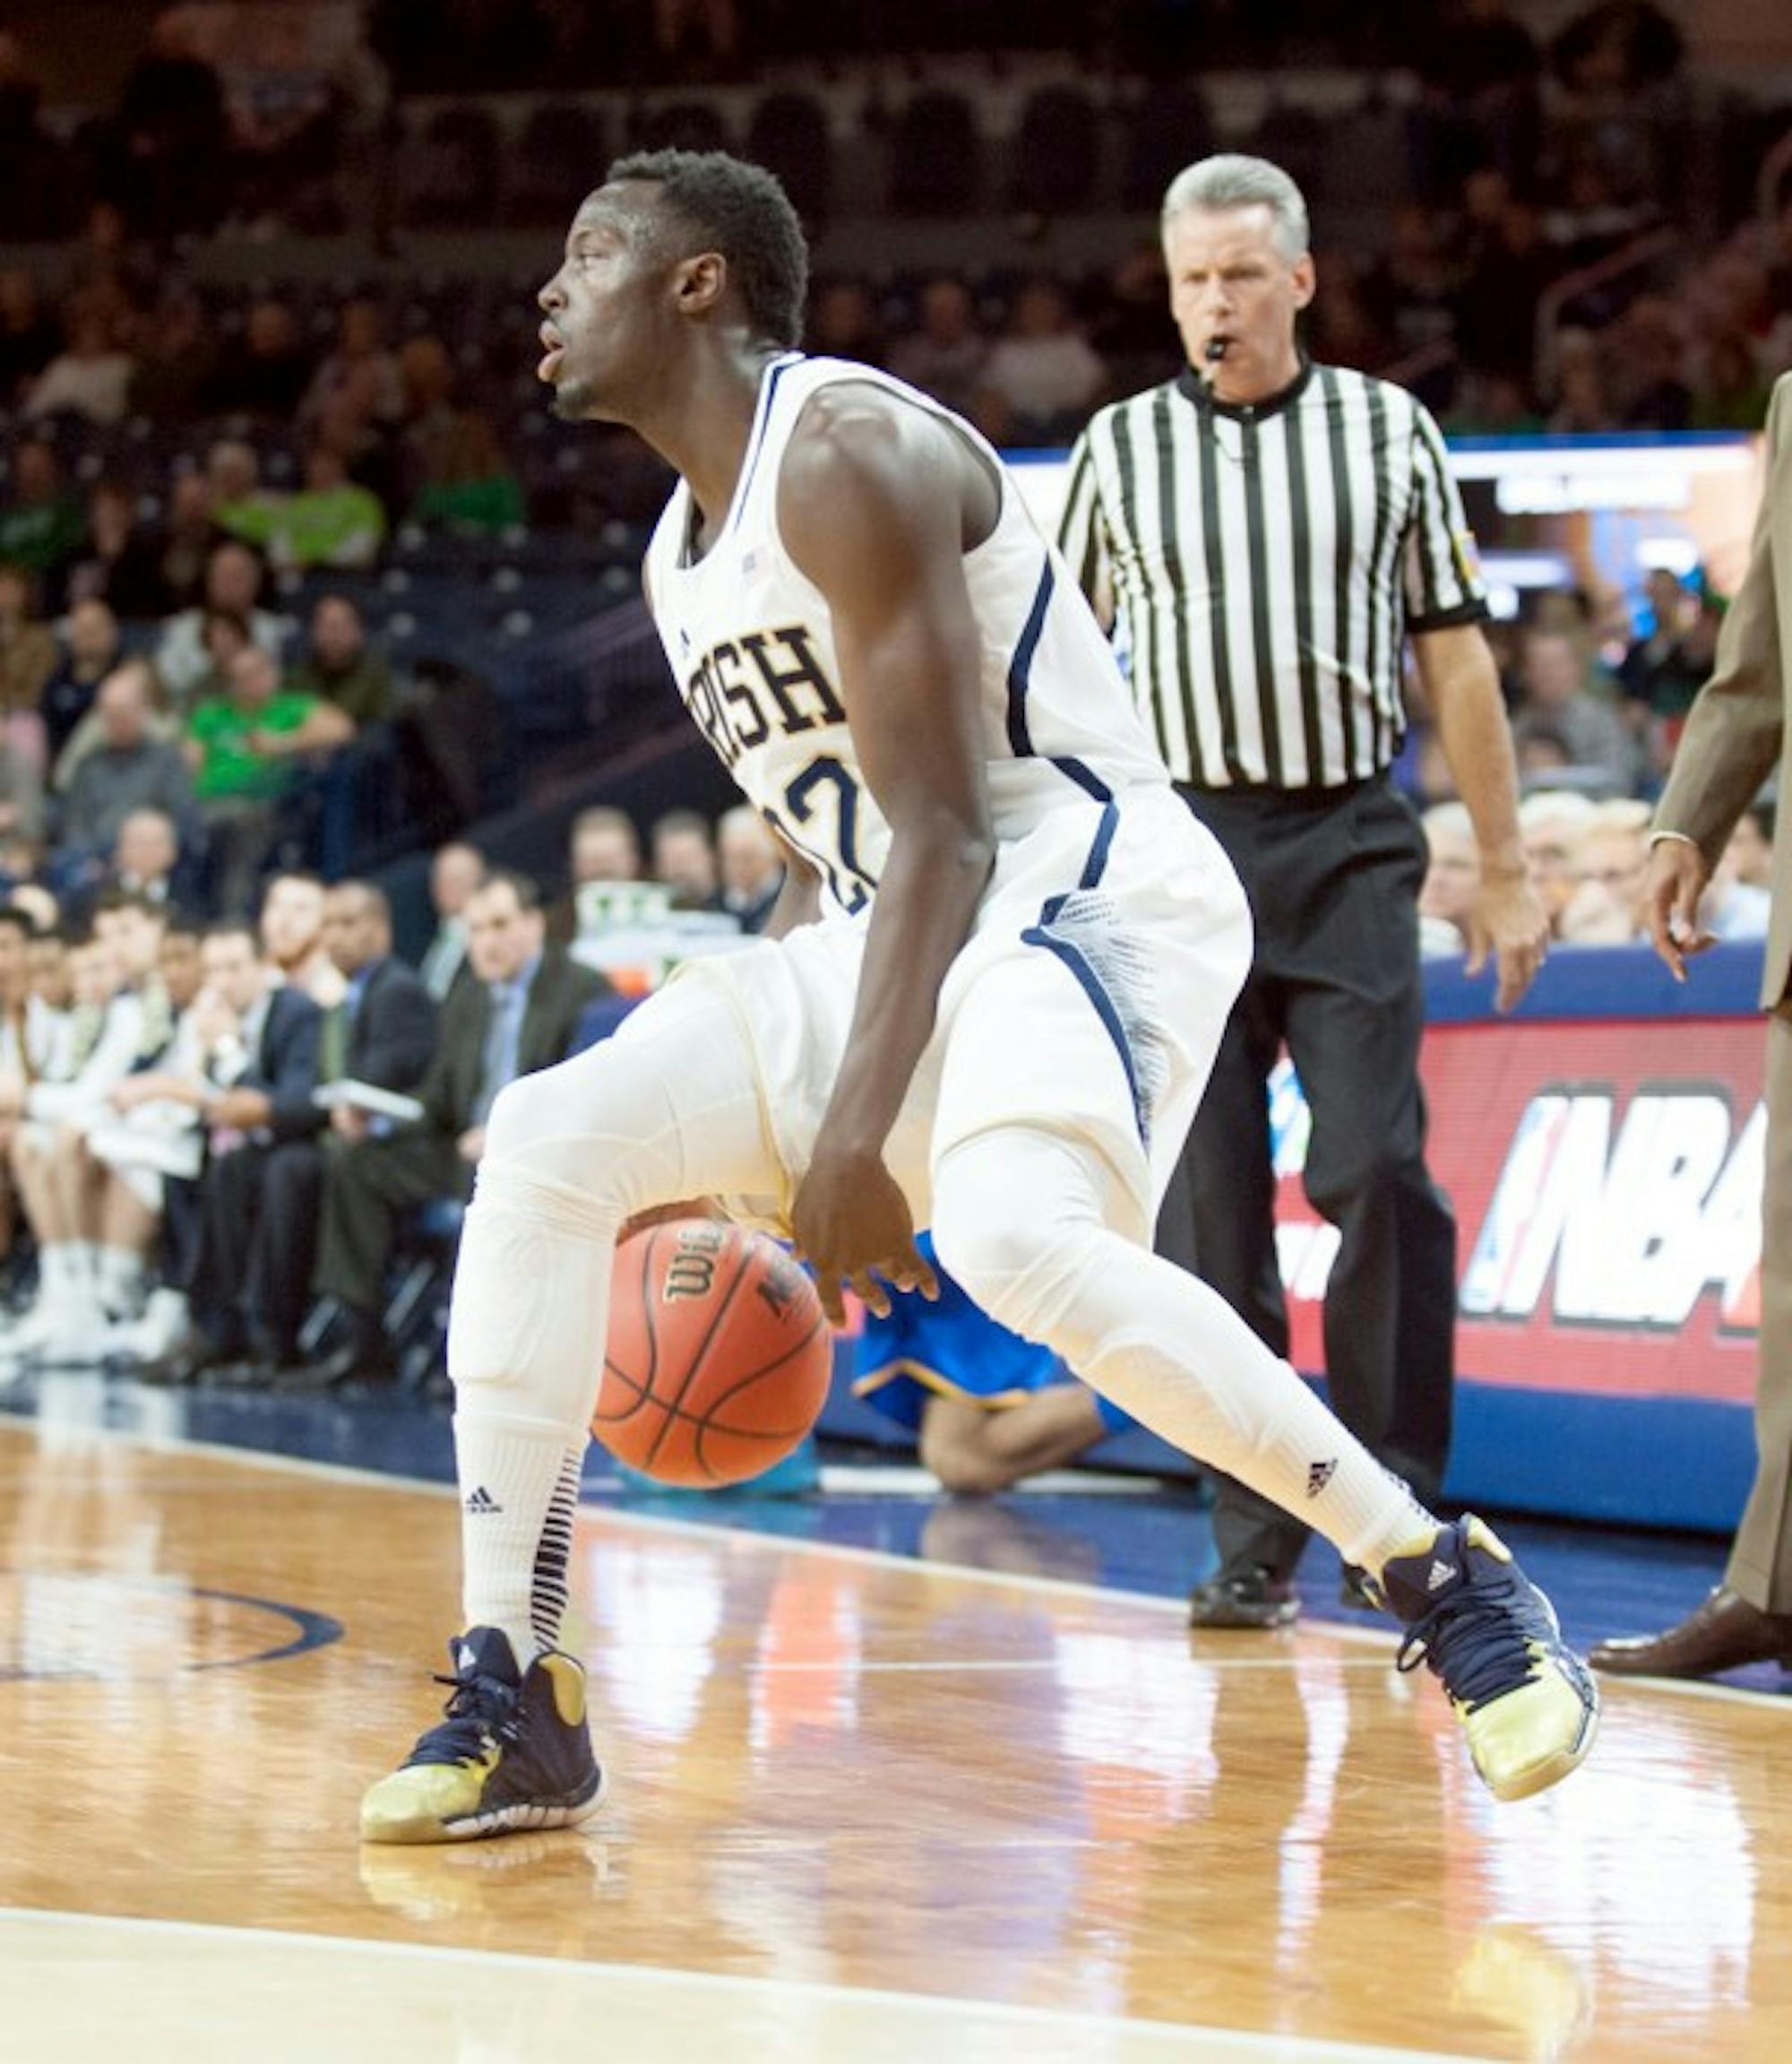 Irish senior guard Jerian Grant dribbles down the sideline during Notre Dame's 80-75 victory over Delaware on Dec. 7.